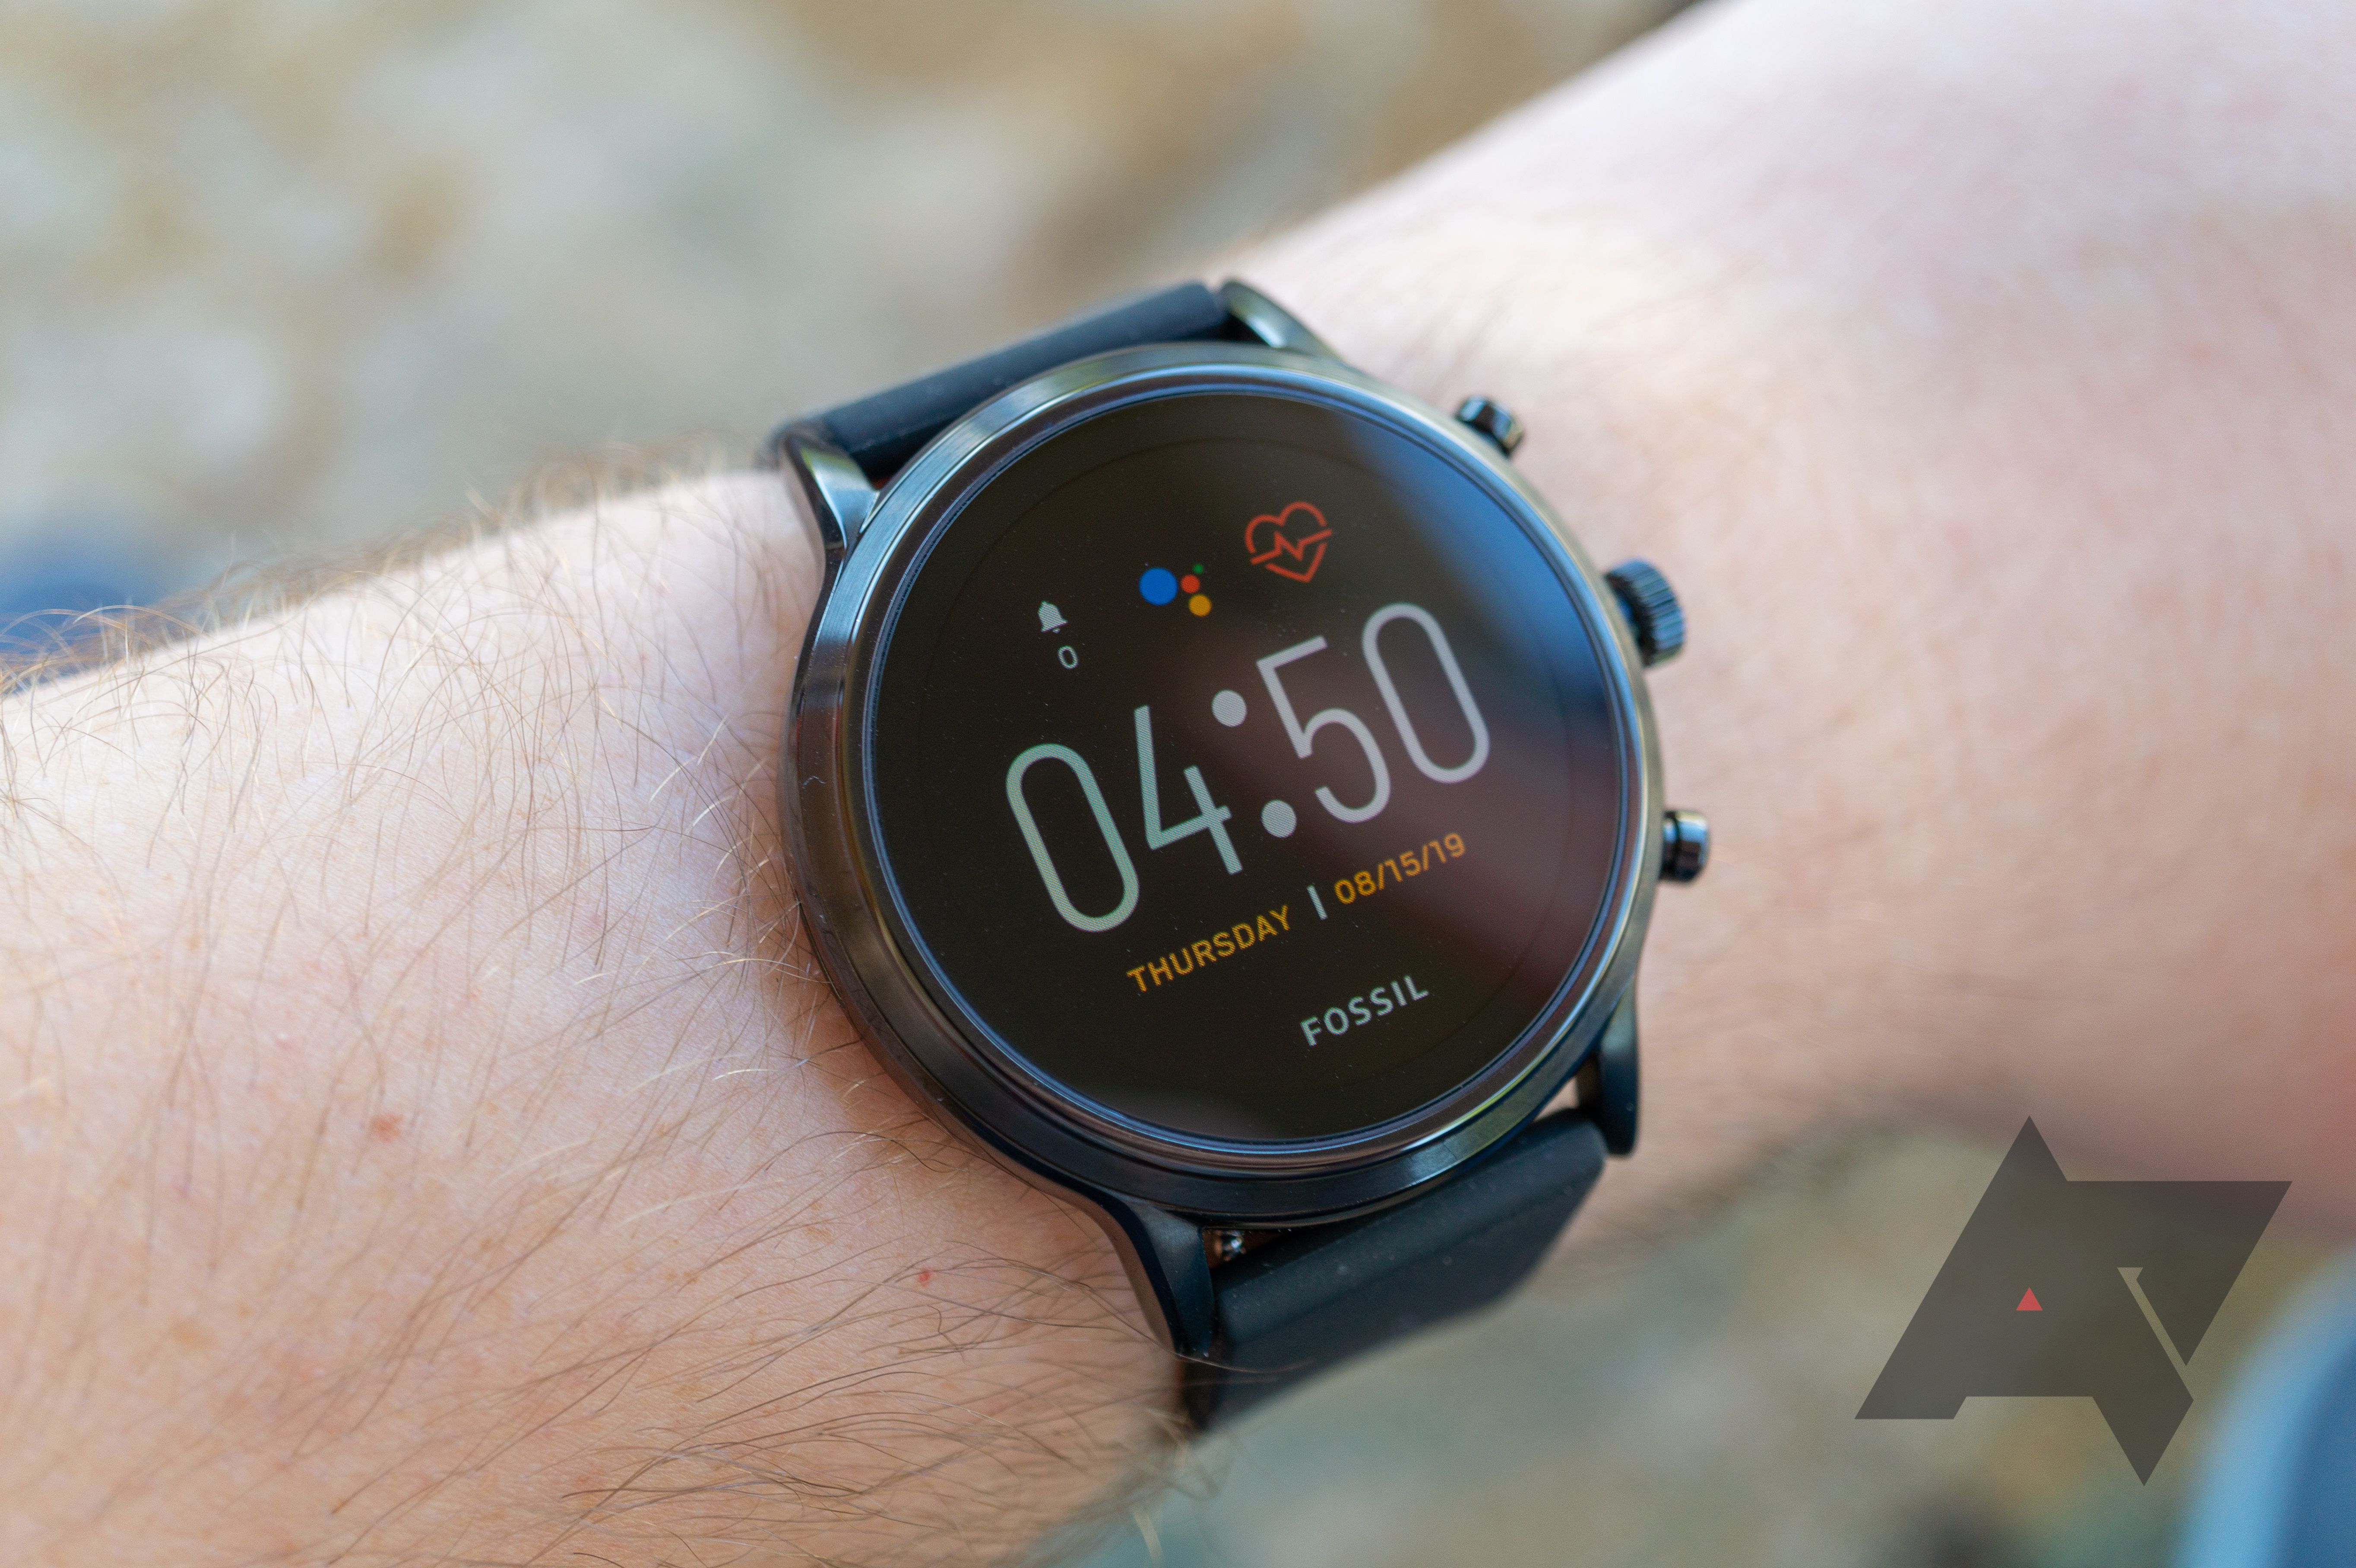 Fossil removed more than half of its watch faces from Gen 5 wearables